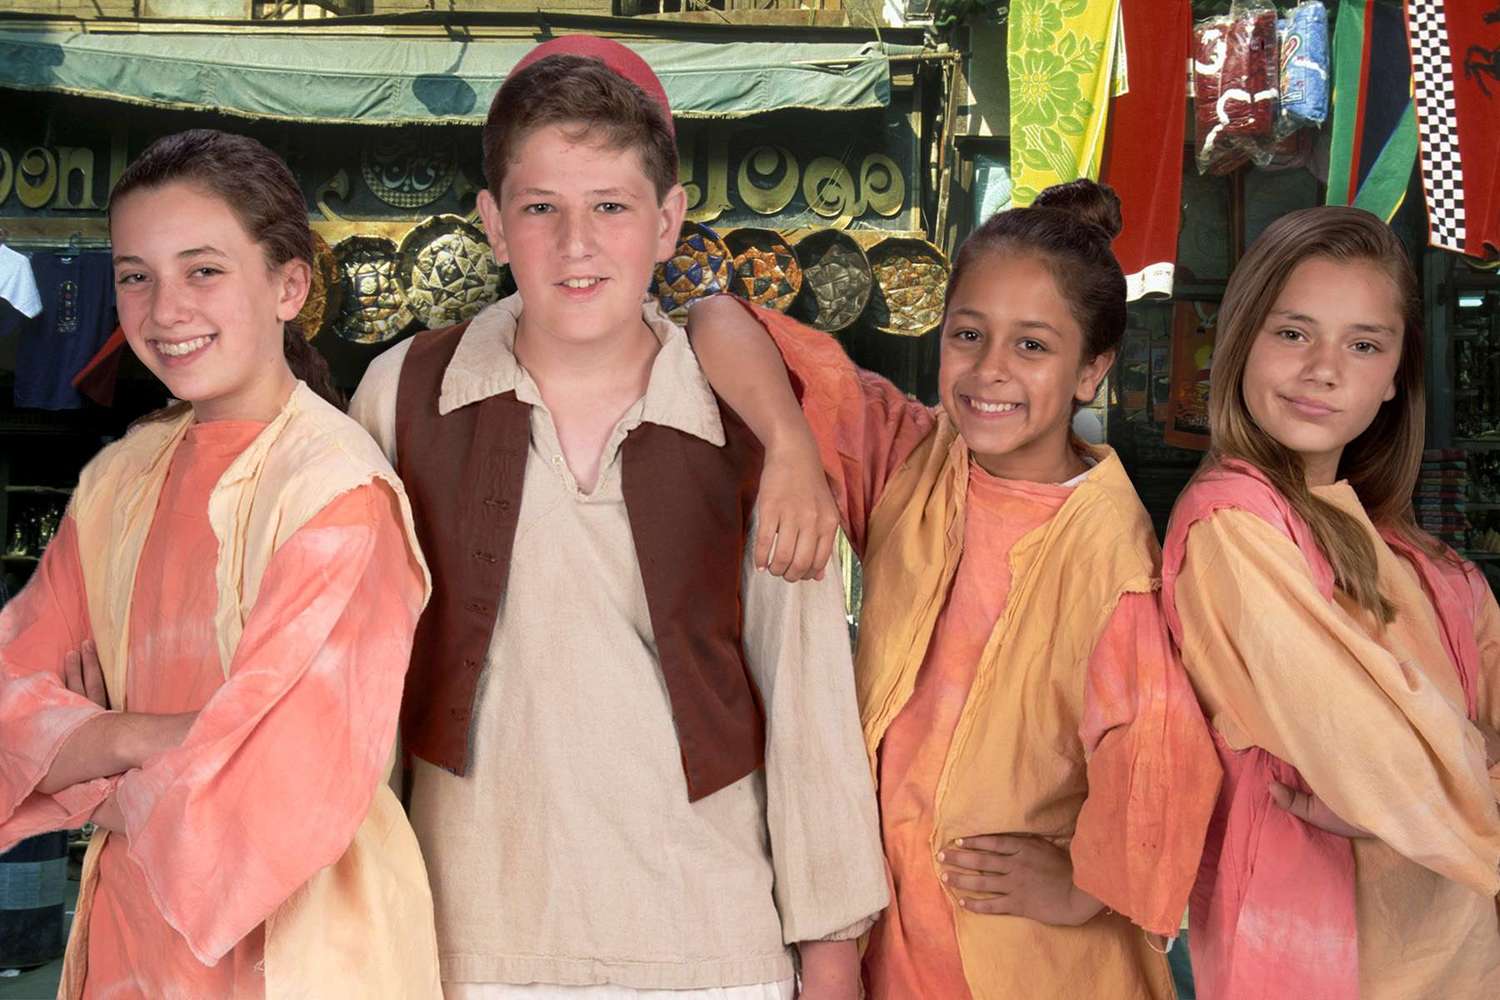 Best friends Babkak (Talia Lawit, Mountain View), Aladdin (Noam Radwin, Palo Alto), Omar (Aanya Tankka, Los Altos), and Kasim (Lola Bacchi, Los Altos) try to keep one step ahead of the guards on the streets of Agrabah in 